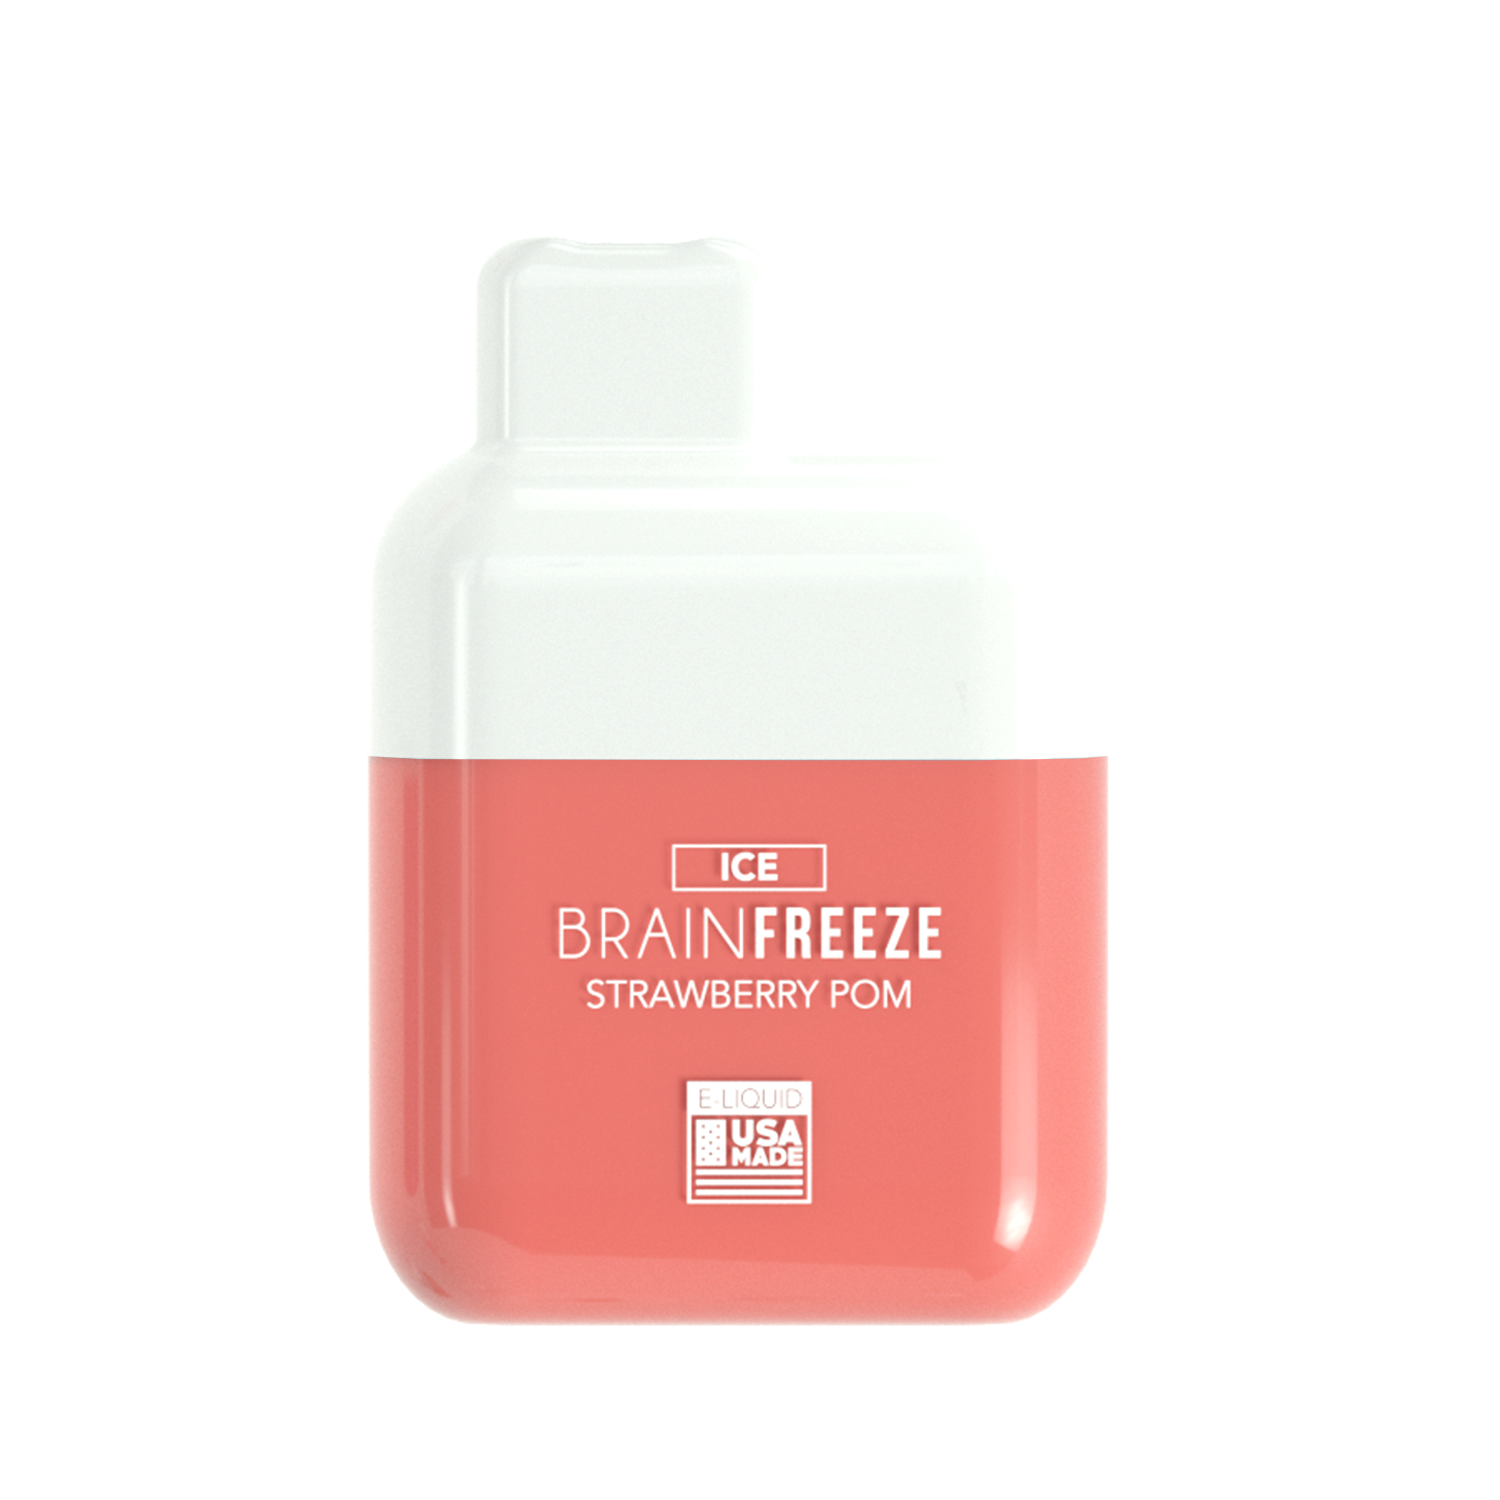 Naked Max Disposable - Strawberry Pom Brain Freeze Ice